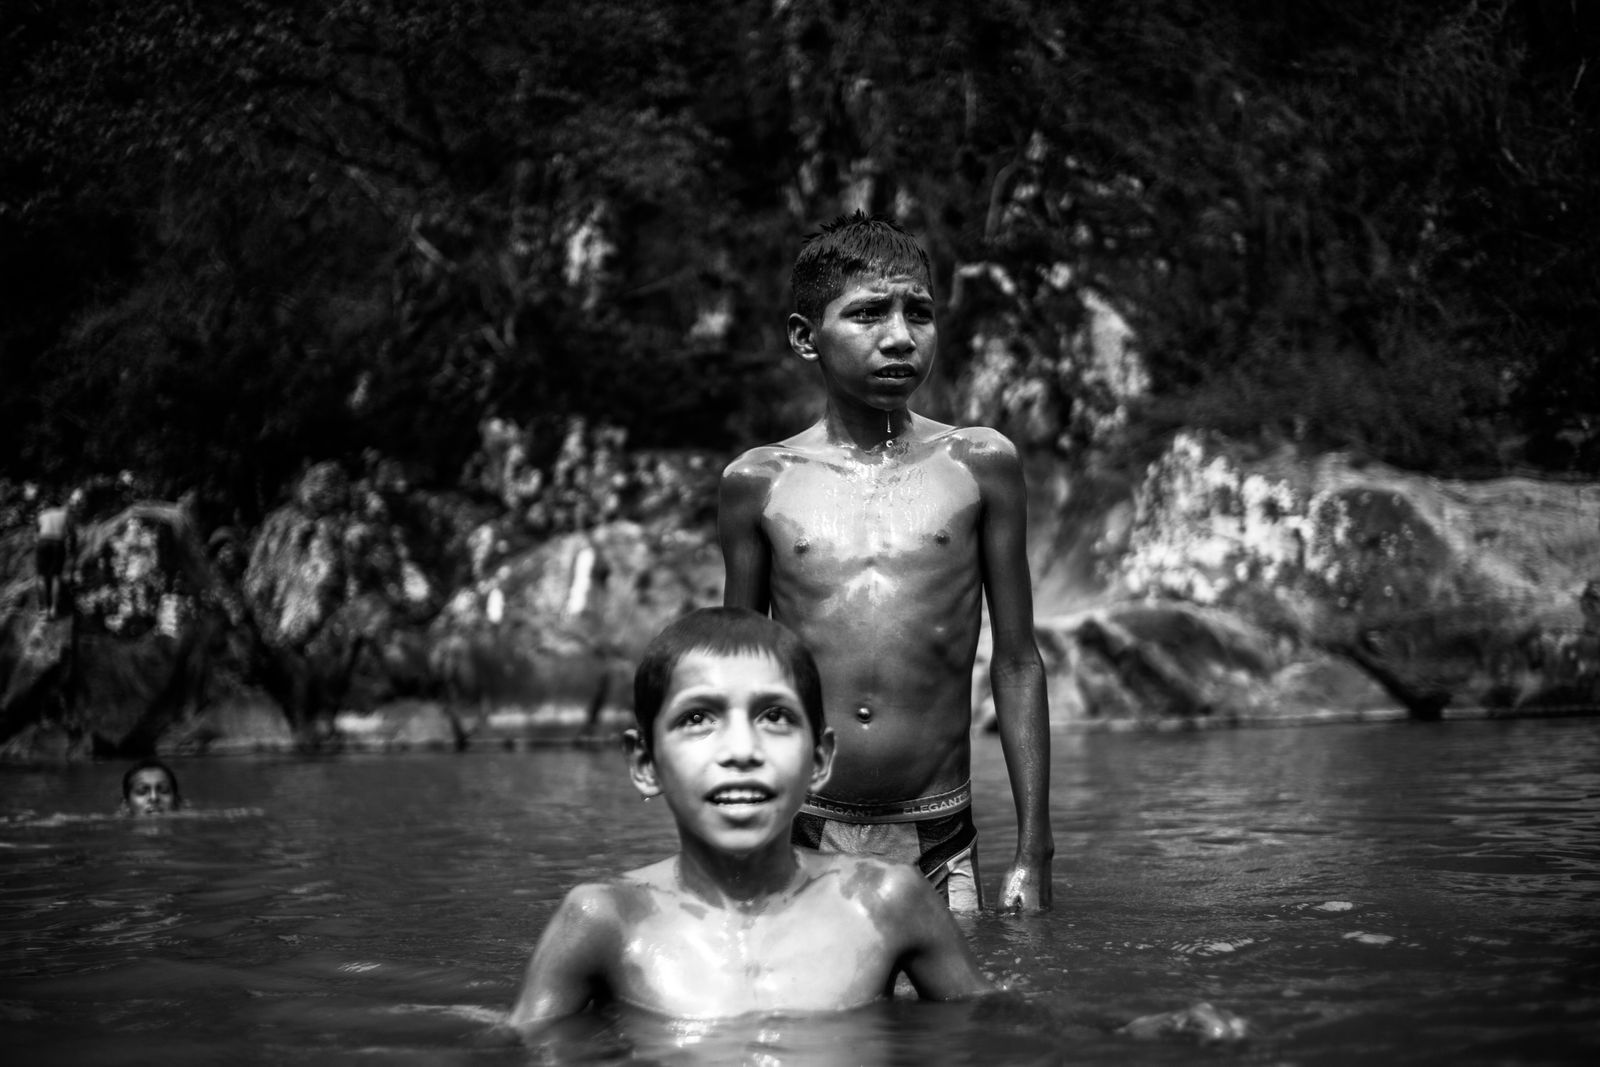 © Victor Galeano - Image from the Guardians of the Río Gualcarque  photography project